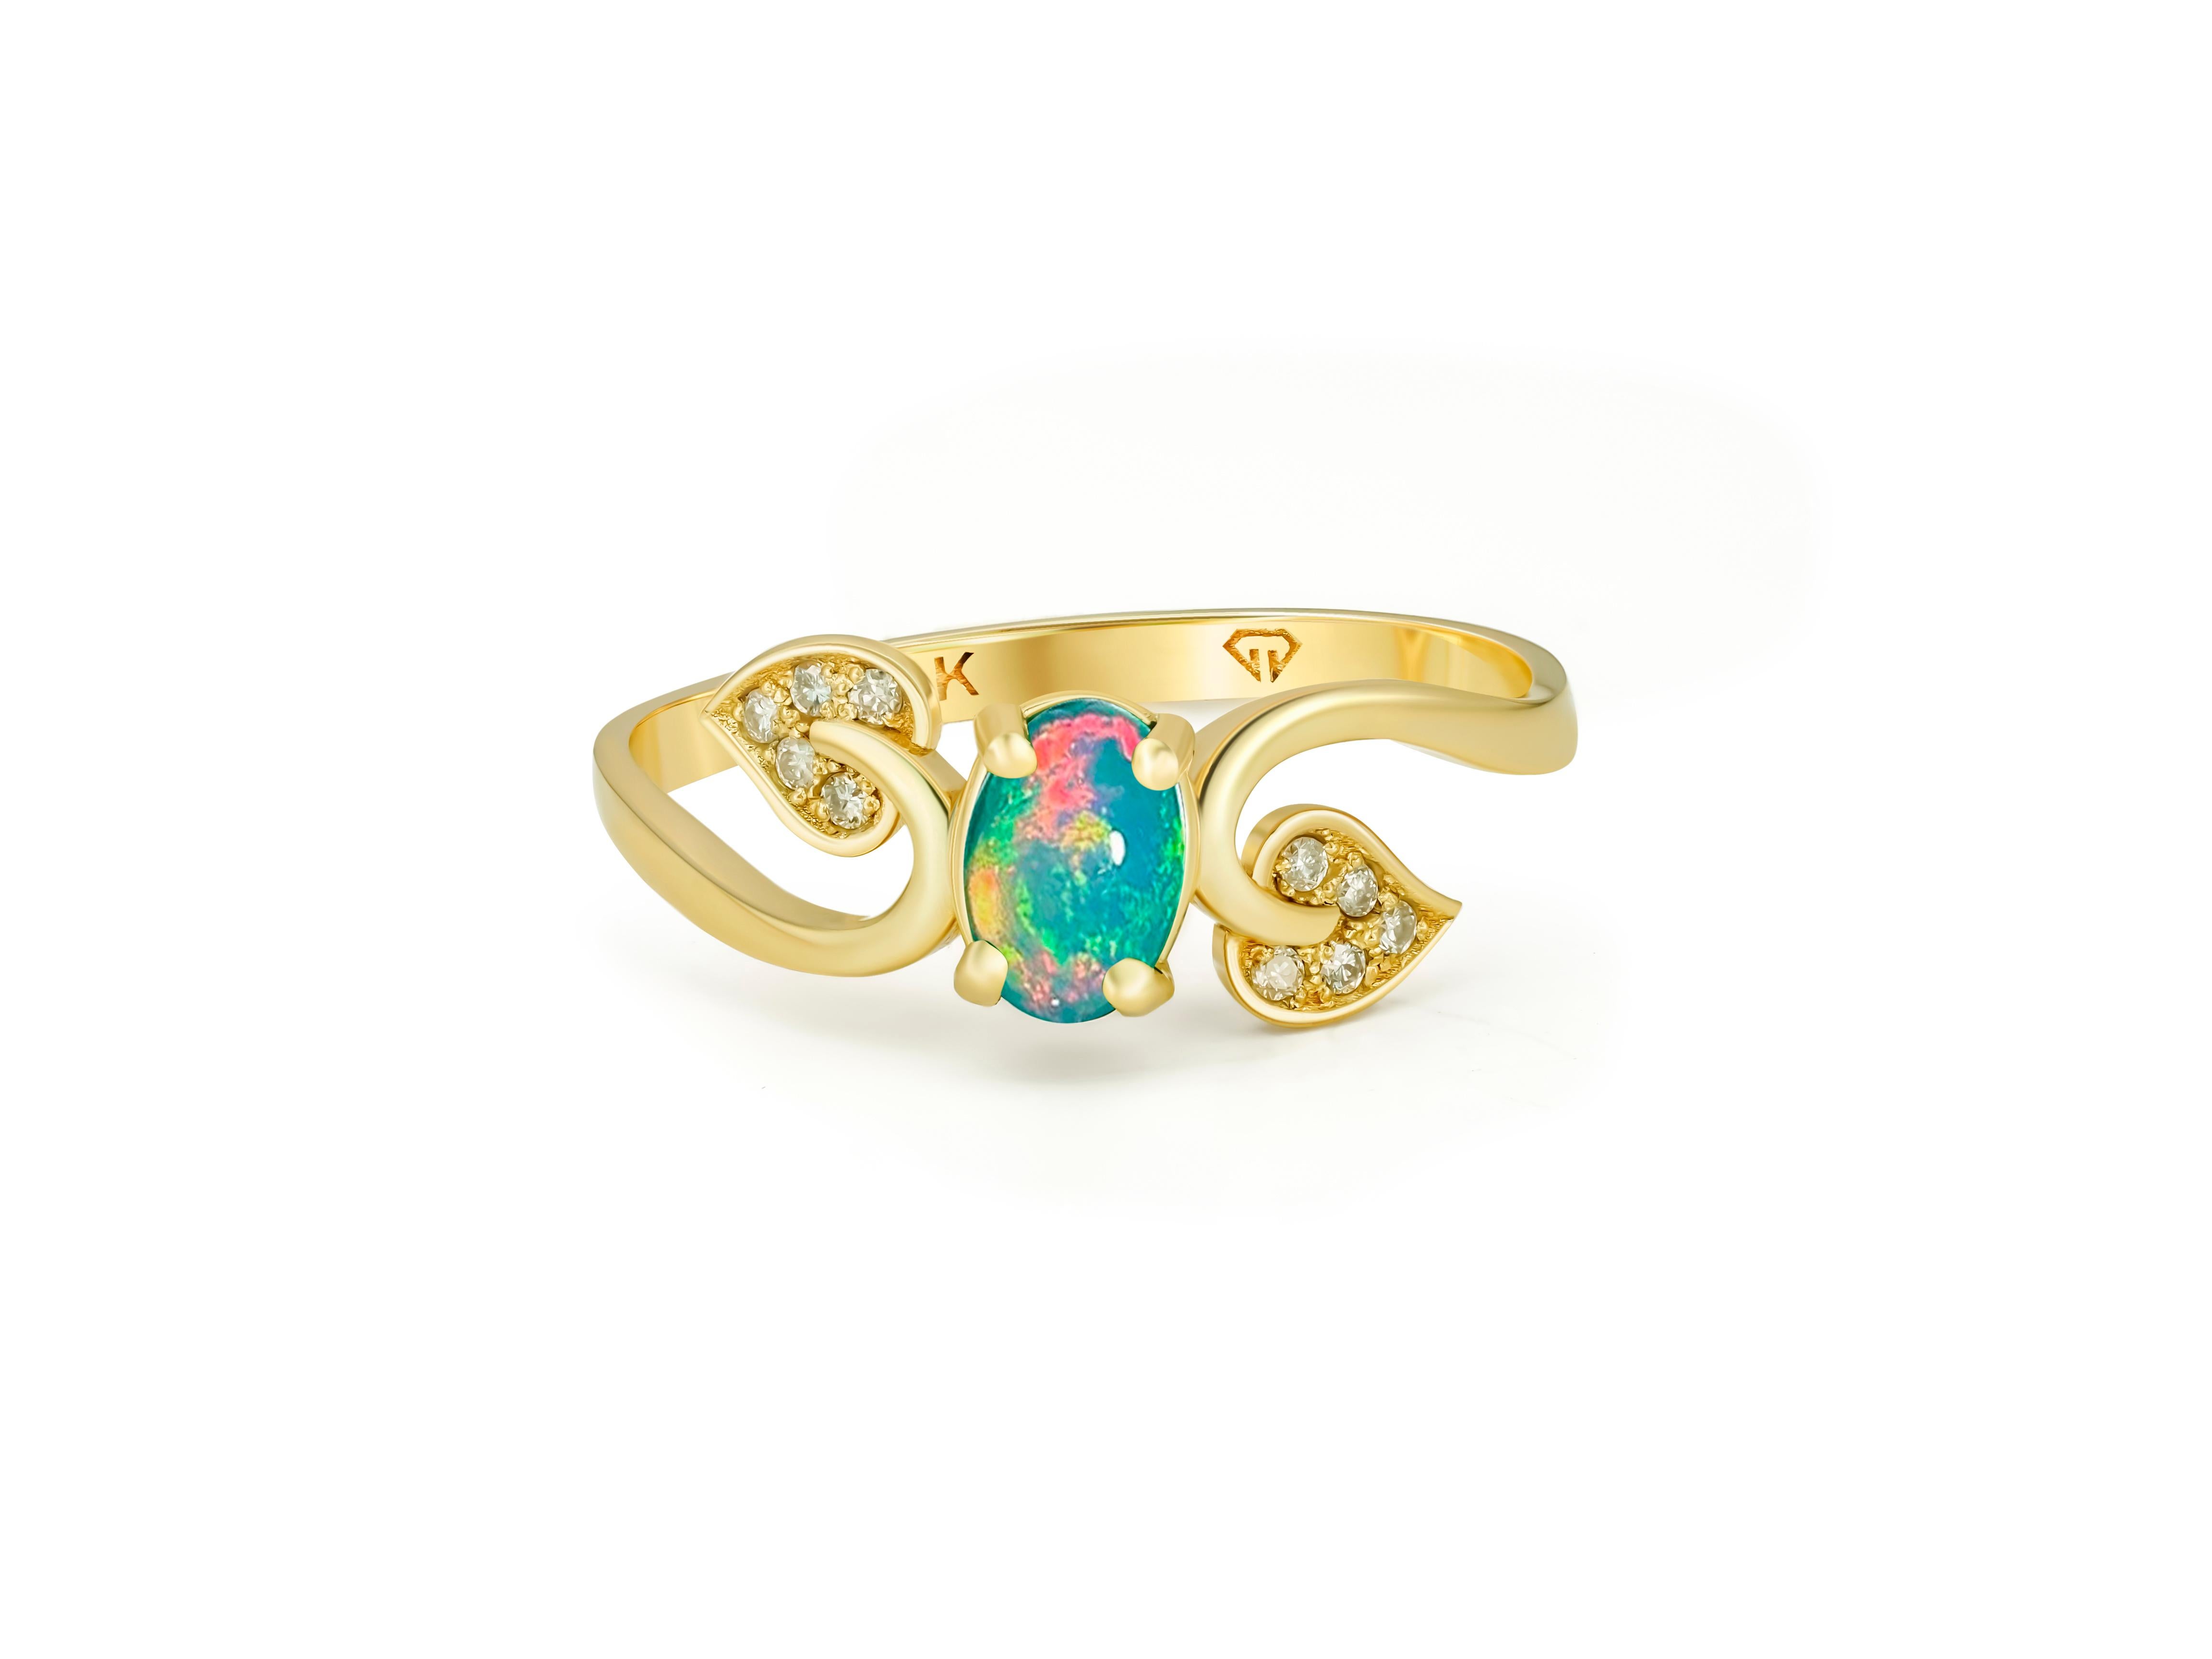 Gold leaves ring with opal. 
Opal engagement ring. Opal 14k gold ring. Opal vintage ring. October birthstone ring. Oval Opal ring.

Metal: 14kt solid gold
Total weight: 1.8 gr (depends from size).

Central gemstone: Natural Opal
Color: multicolor.